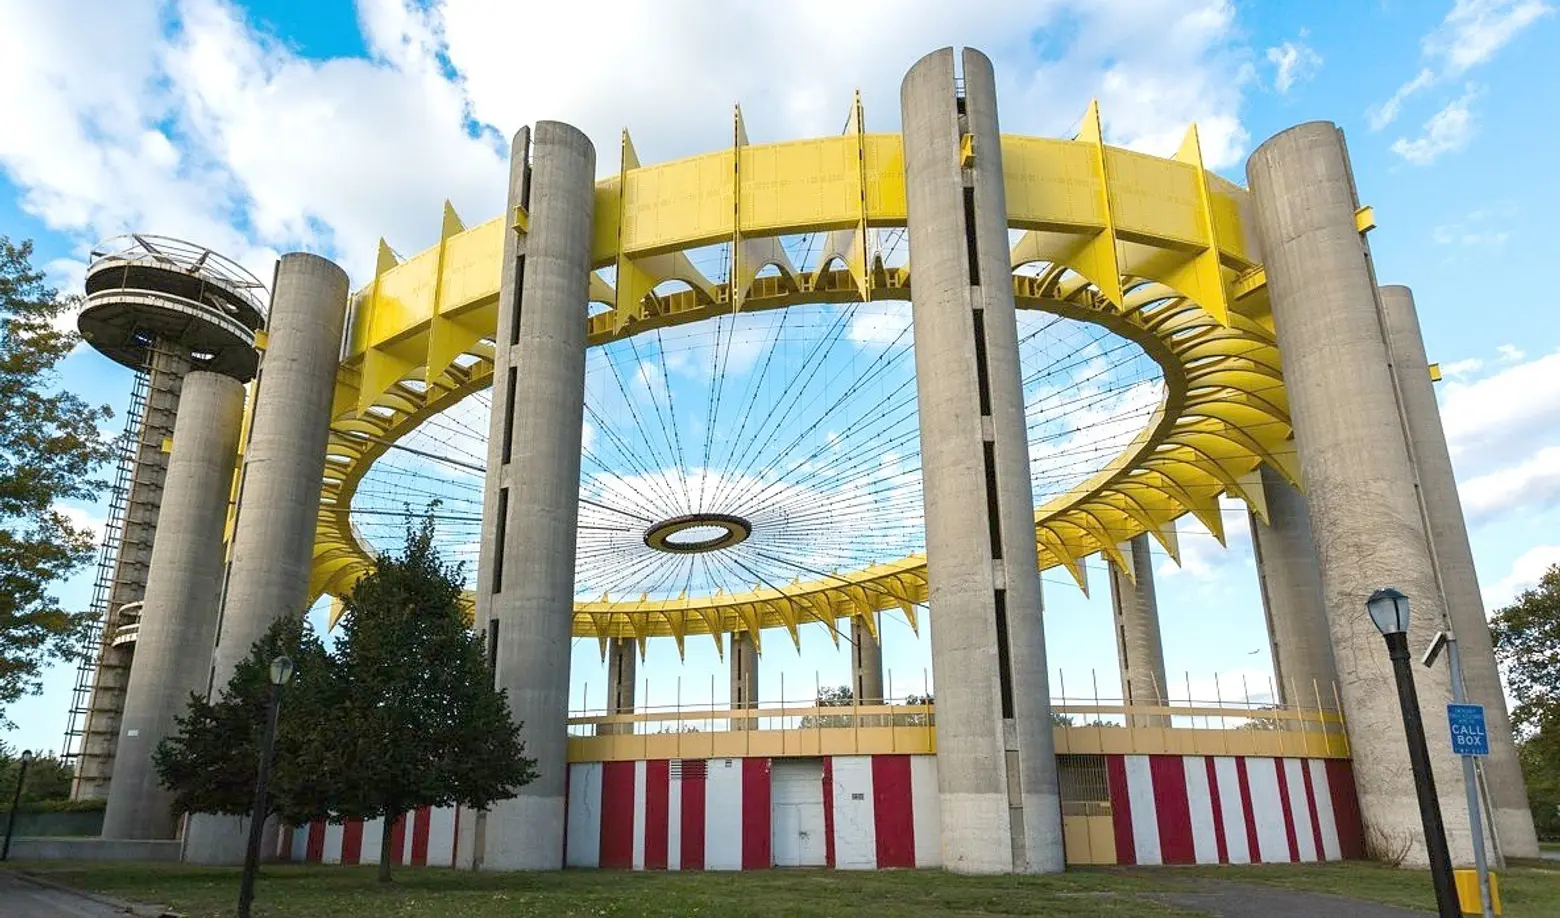 New York State Pavilion to receive a $16.5M FEMA grant for Hurricane Sandy repairs